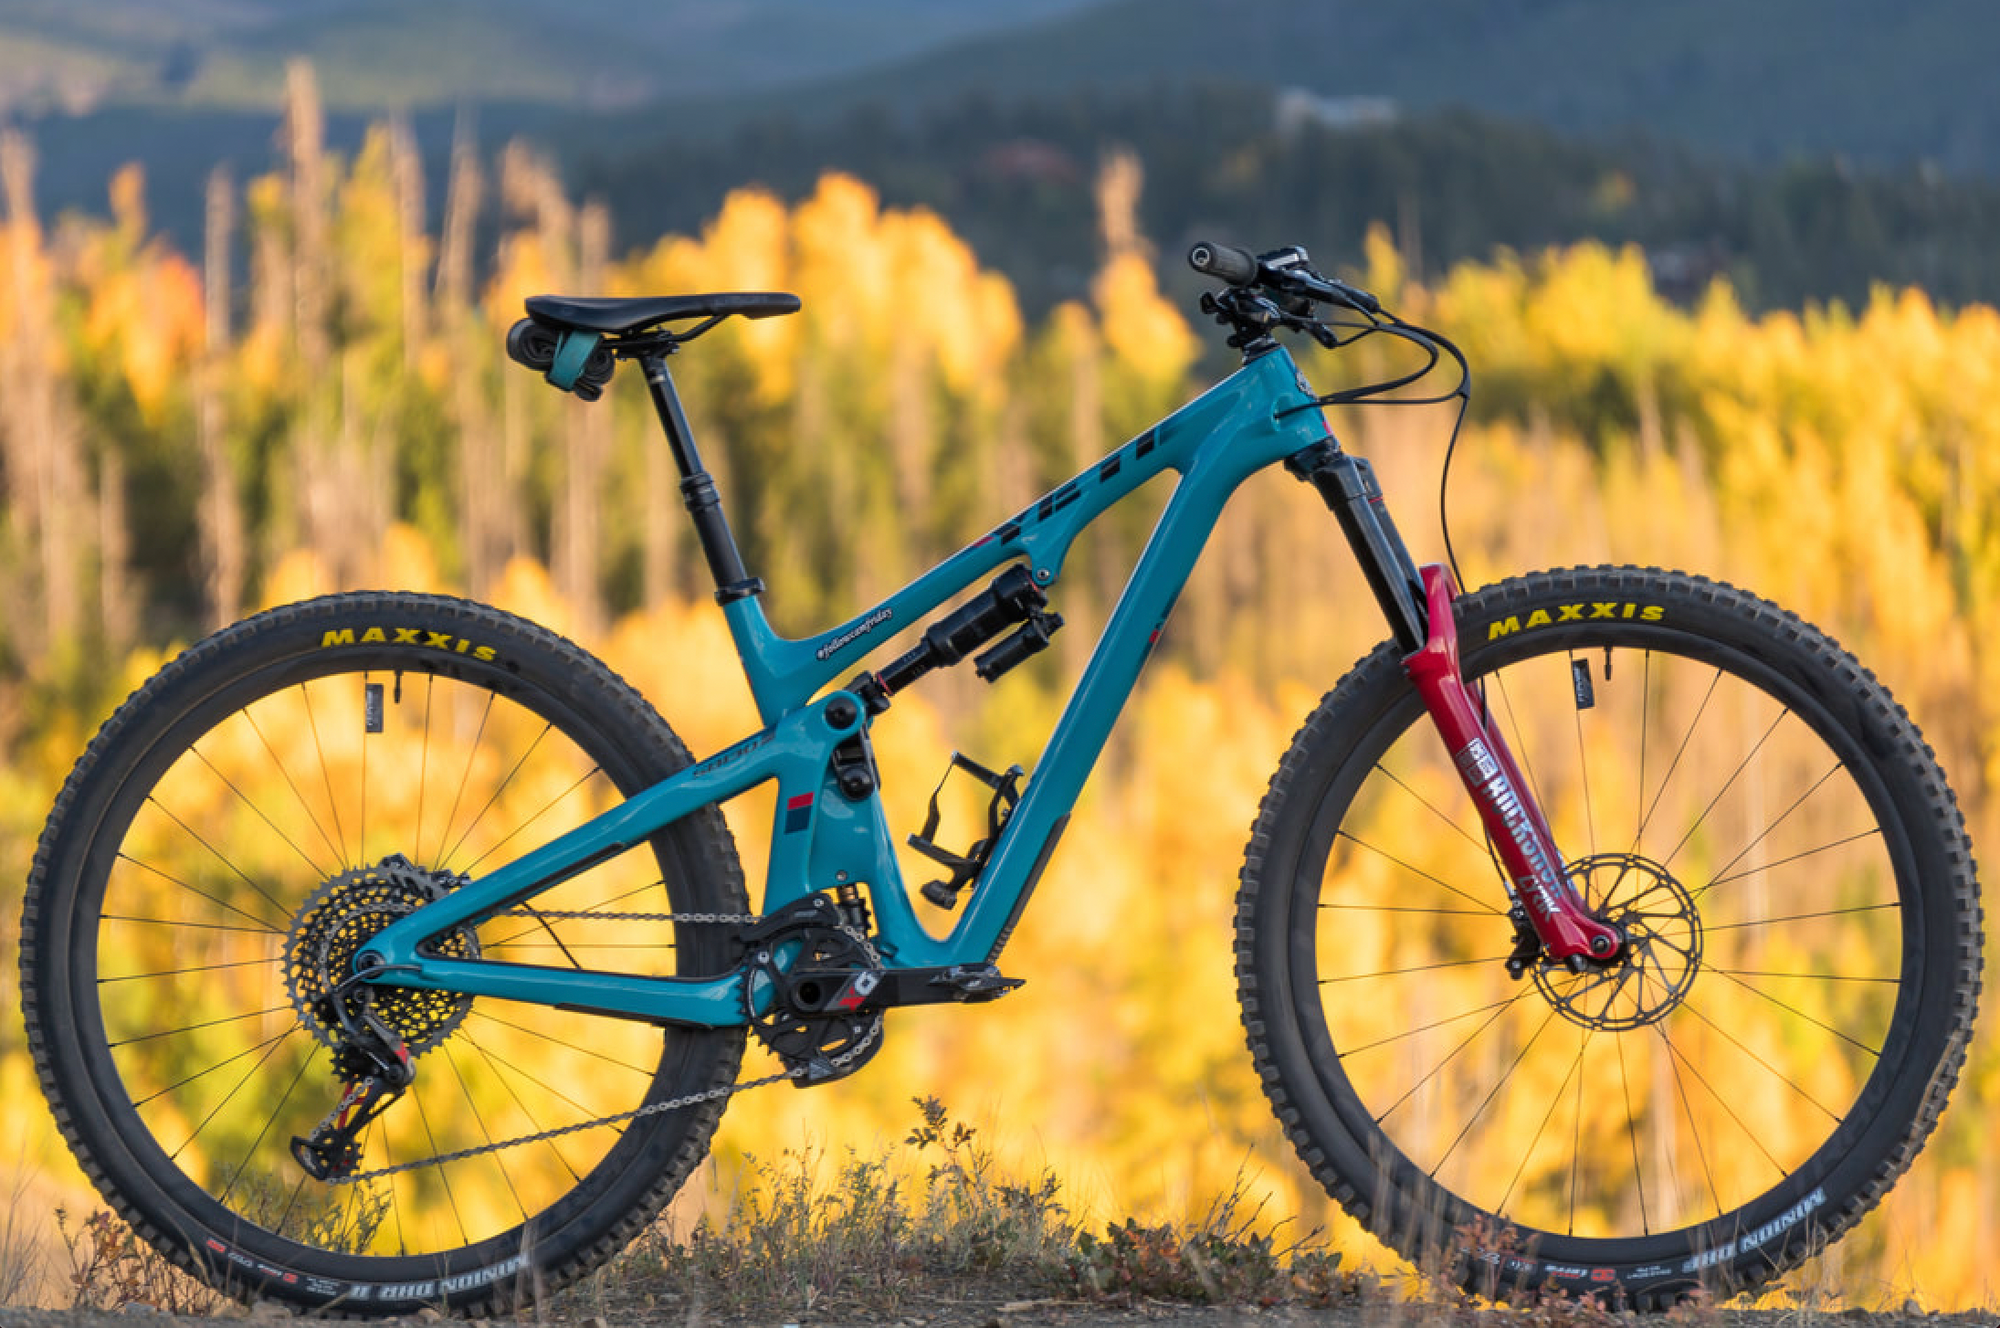 yeti sb130 review, Ibis Ripmo V2 review, Salsa Backthorn Carbon review, Cannondale Habit 4 review,  Specialized Stumpjumper EVO review